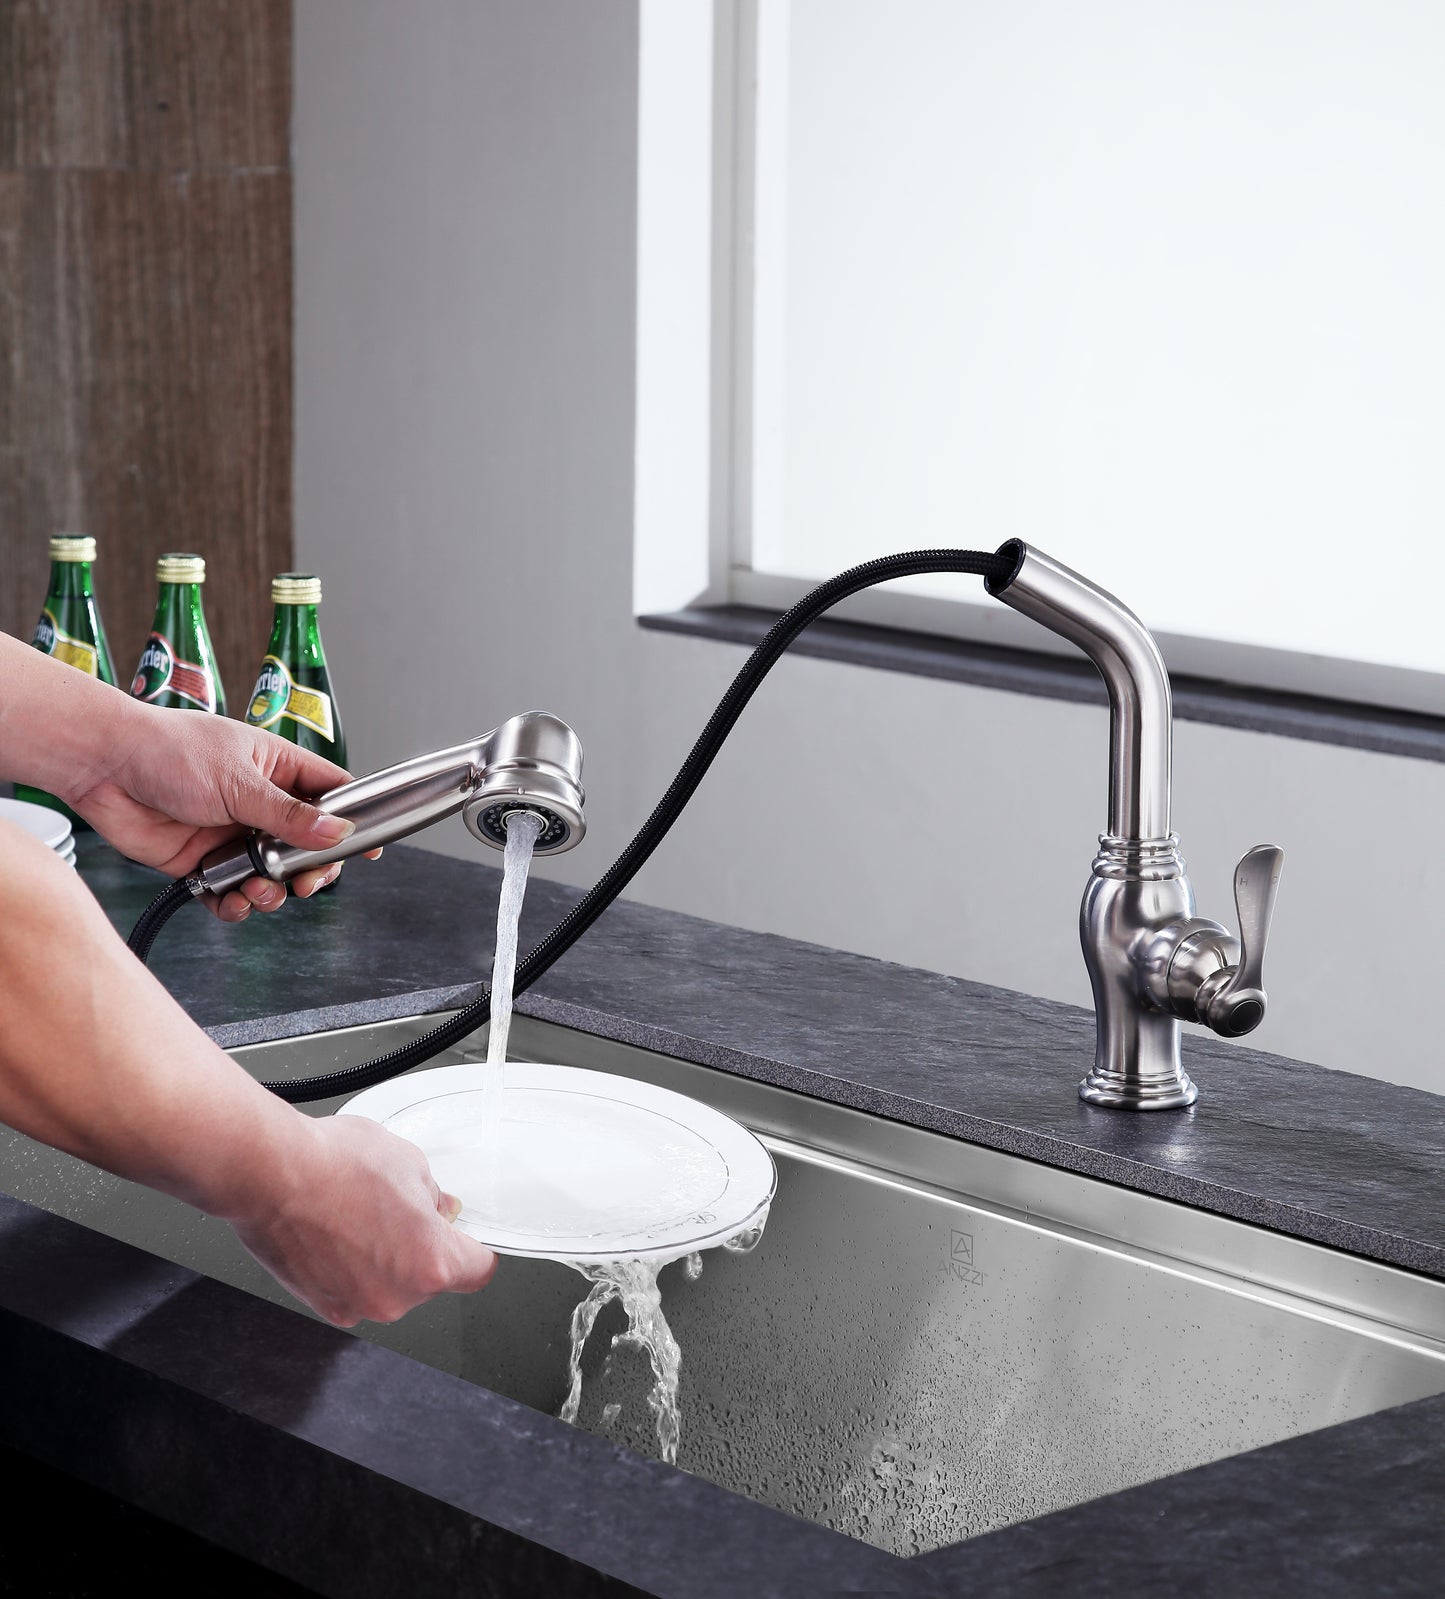 Del Moro Single-Handle Pull-Out Sprayer Kitchen Faucet